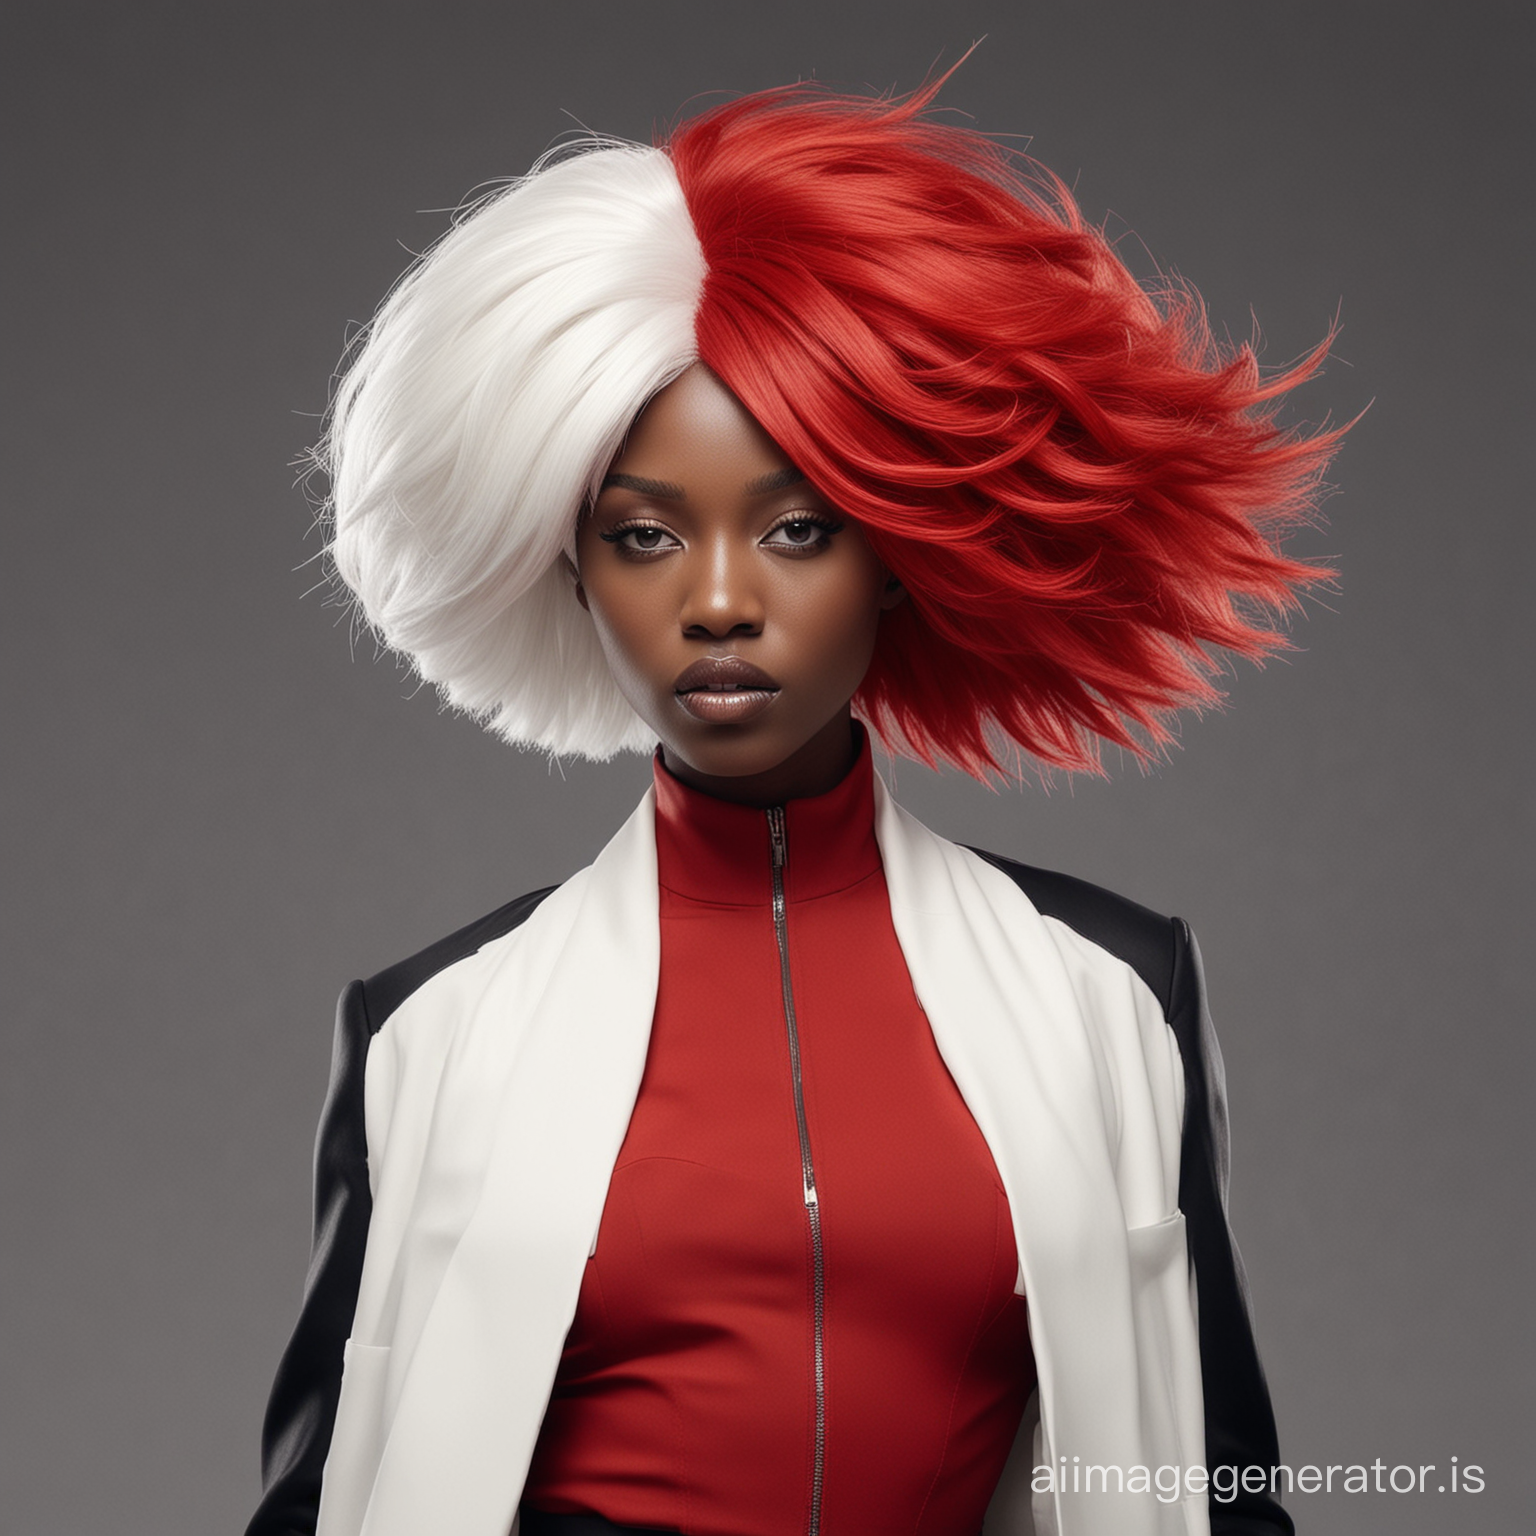 minimalistic and sleek. Hyperrealistic. Black woman female model in Vera wang extremely dramatic inspire garments. White bob paper made wig as hair. Dressed in red. Regal and edgy. Intricate fashion styling. Oversized flowing red hair. Hd. subsurface scattering